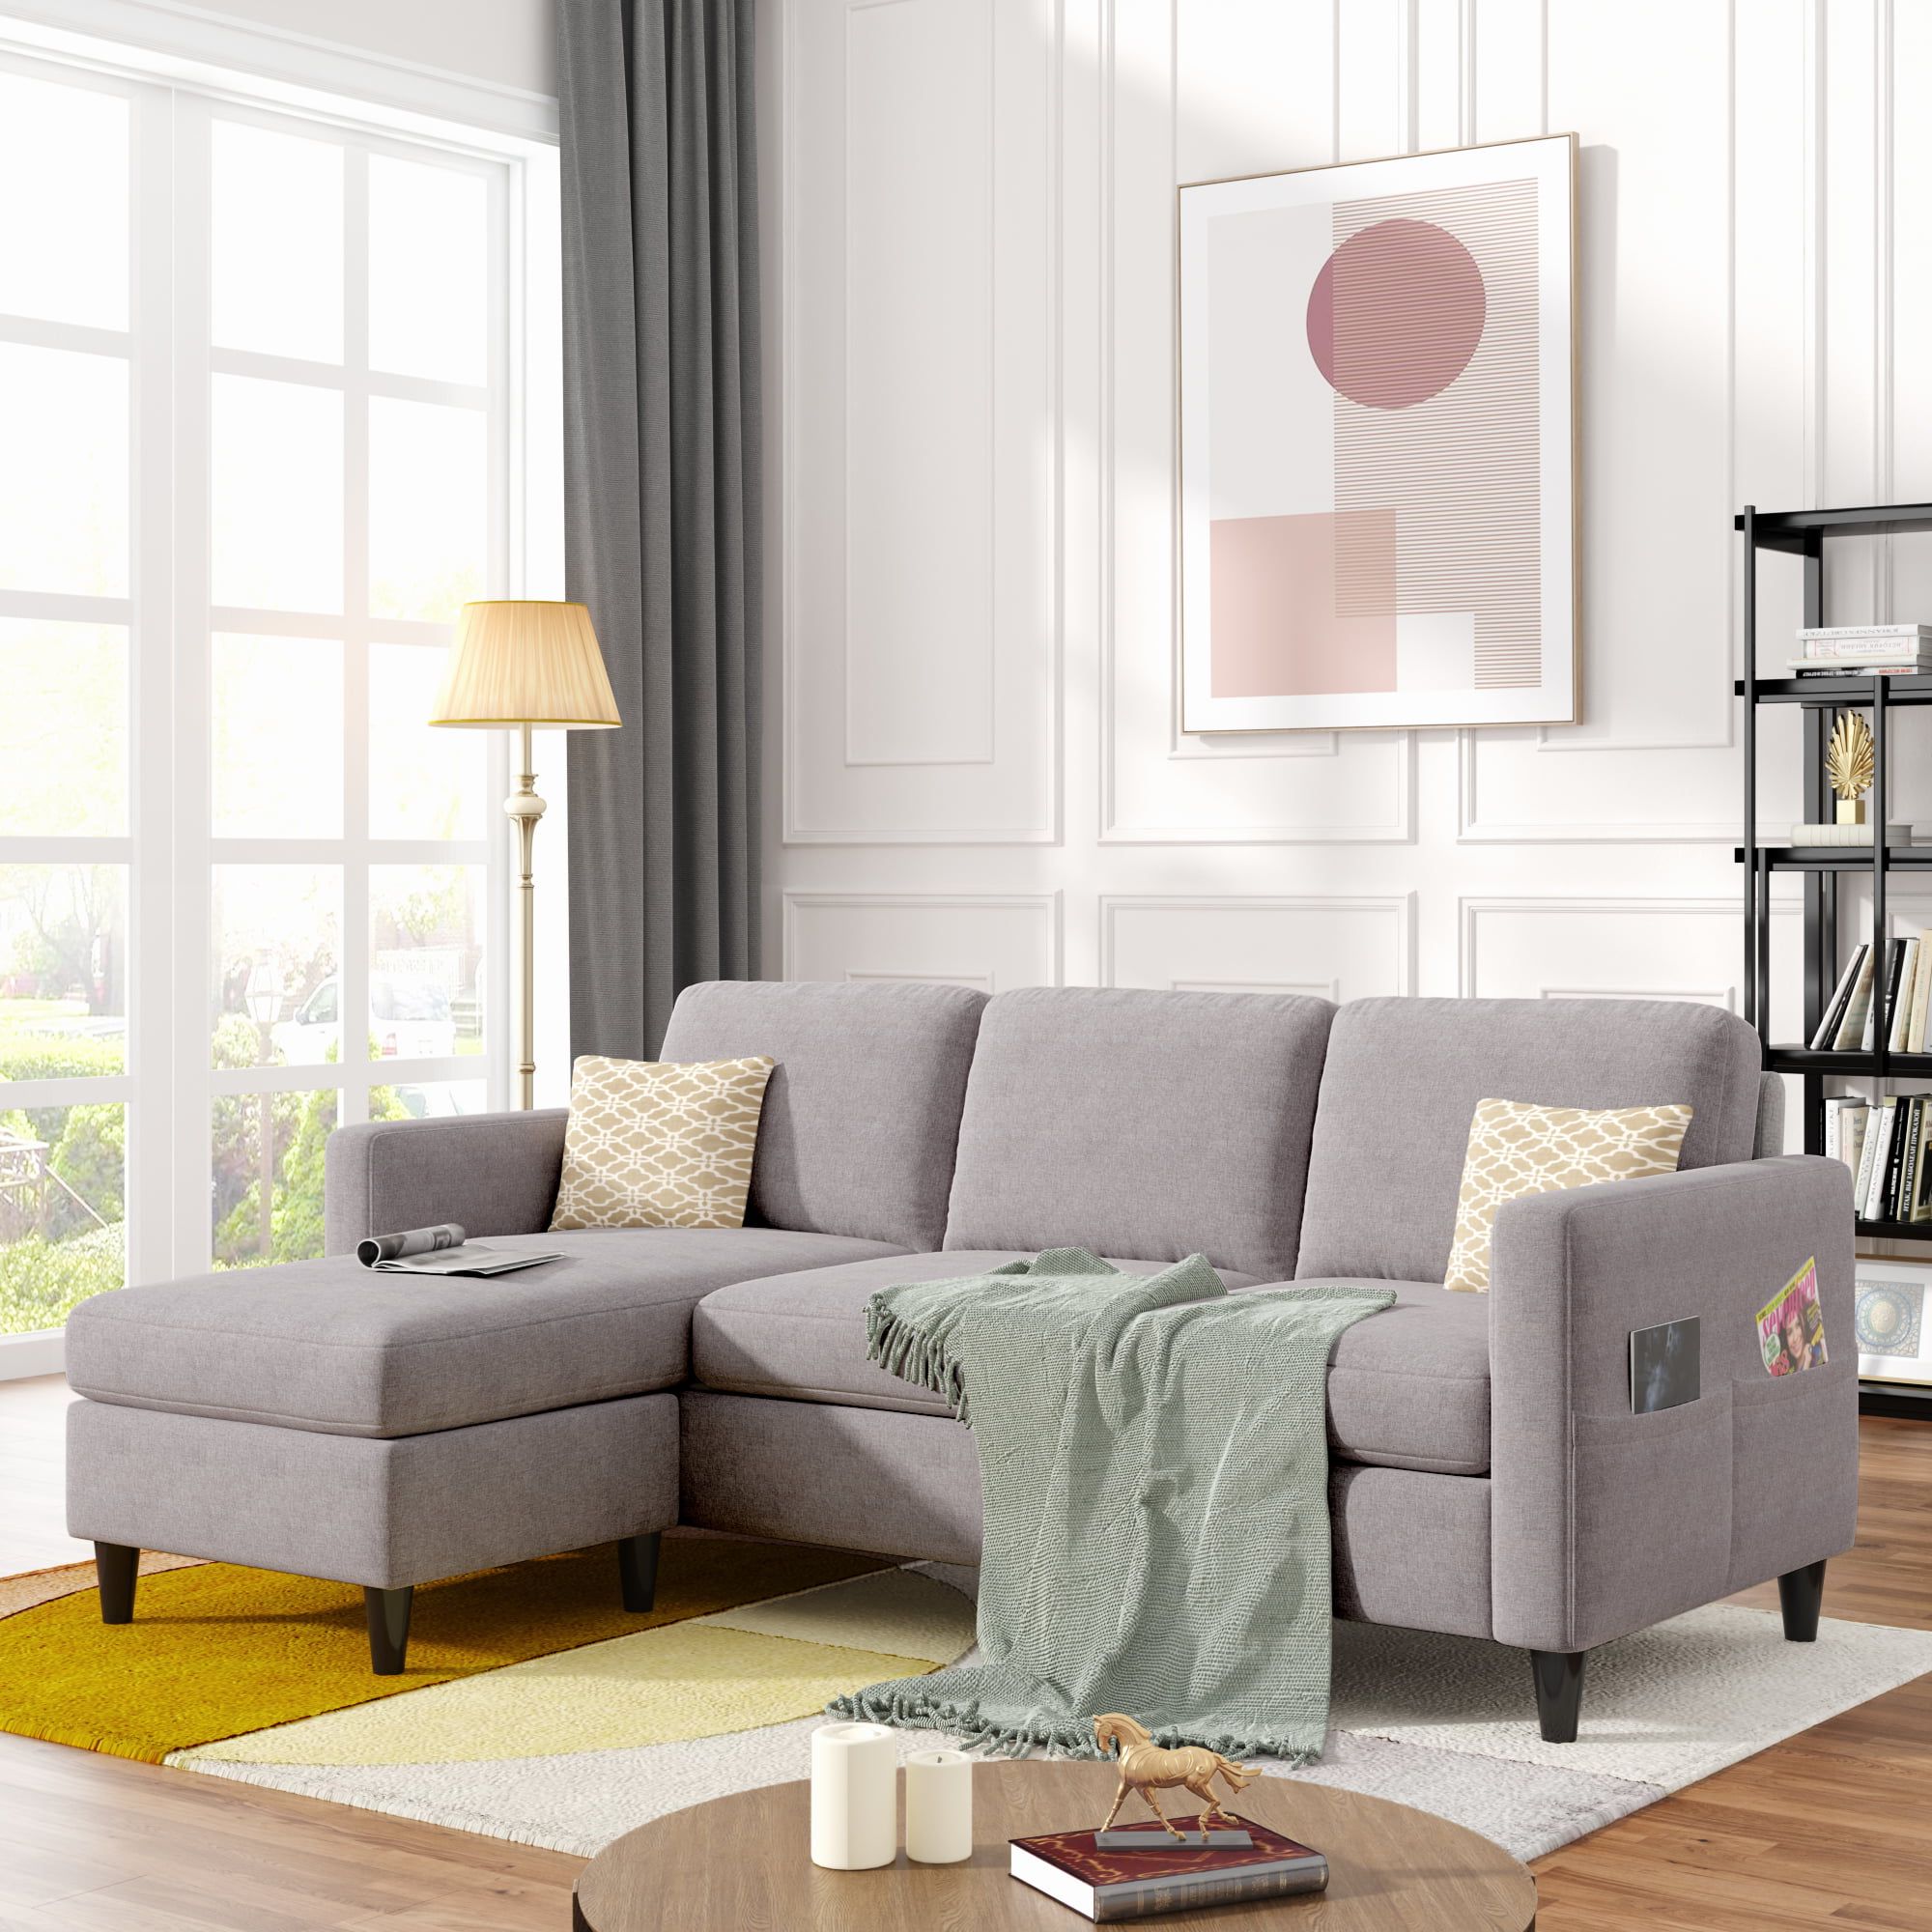 Modern L Shaped Sectional Sofa With Ottoman, Reversible Mid Century Couches  And Sofas With Side Pocket, 3 Seater Upholstered Couch For Small Space, Fabric  Sofa Set For Living Room, Q14174 – Walmart Within Modern L Shaped Fabric Upholstered Couches (Gallery 11 of 20)